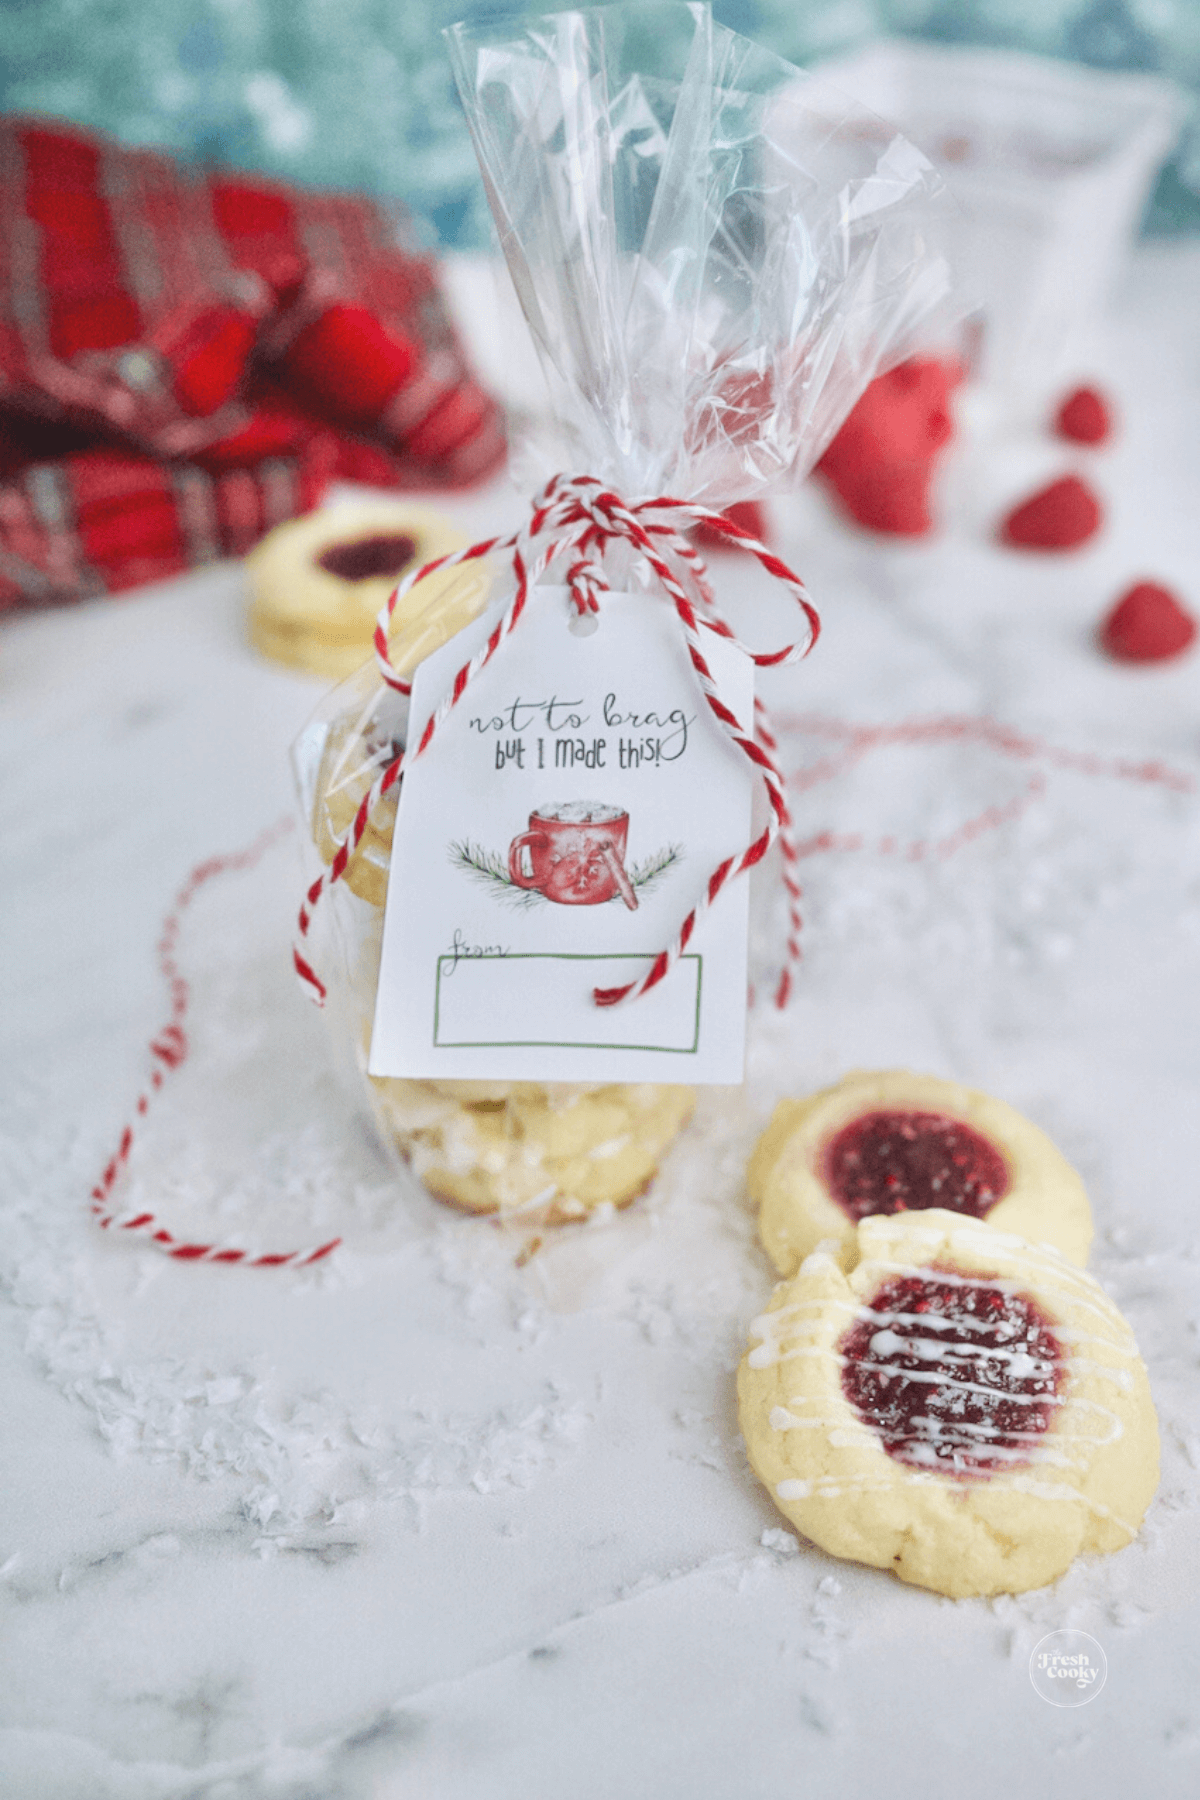 Package cookies into cellophane bags and place gift tag on top.